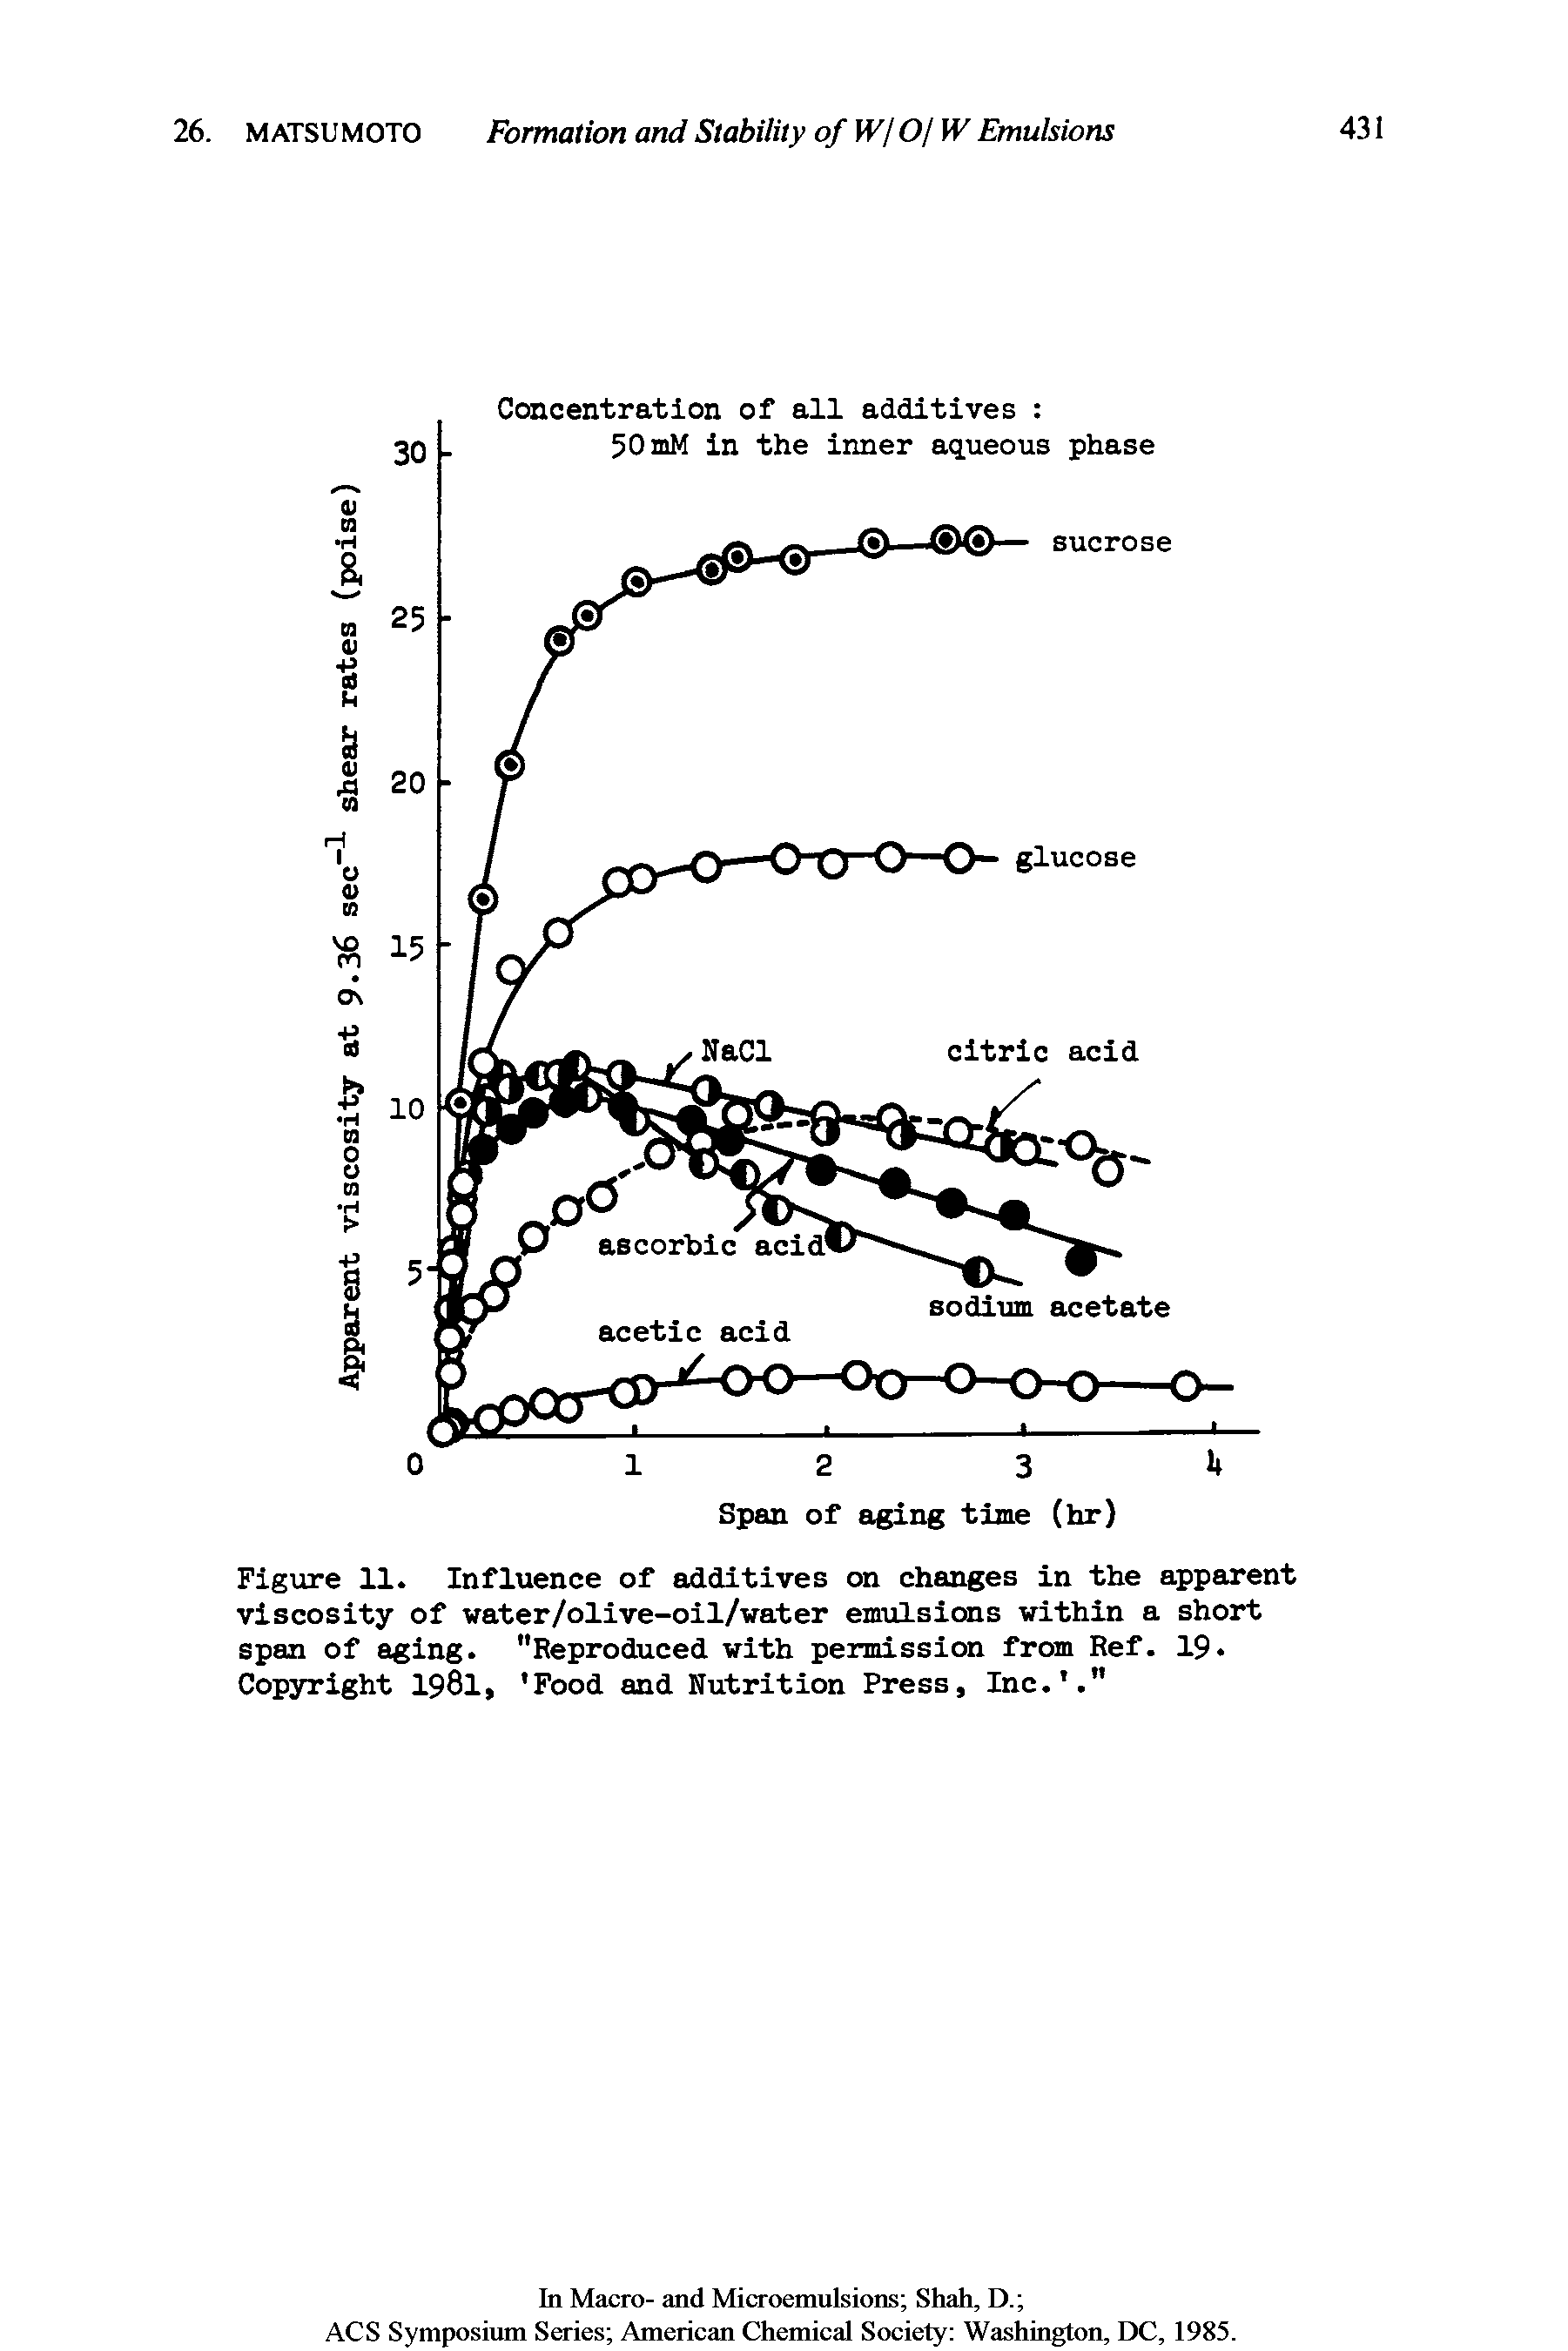 Figure 11. Influence of additives on changes in the apparent viscosity of water/olive-oil/water emulsions within a short span of aging. "Reproduced with permission from Ref. 19. Copyright 1981, Food and Nutrition Press, Inc.. "...